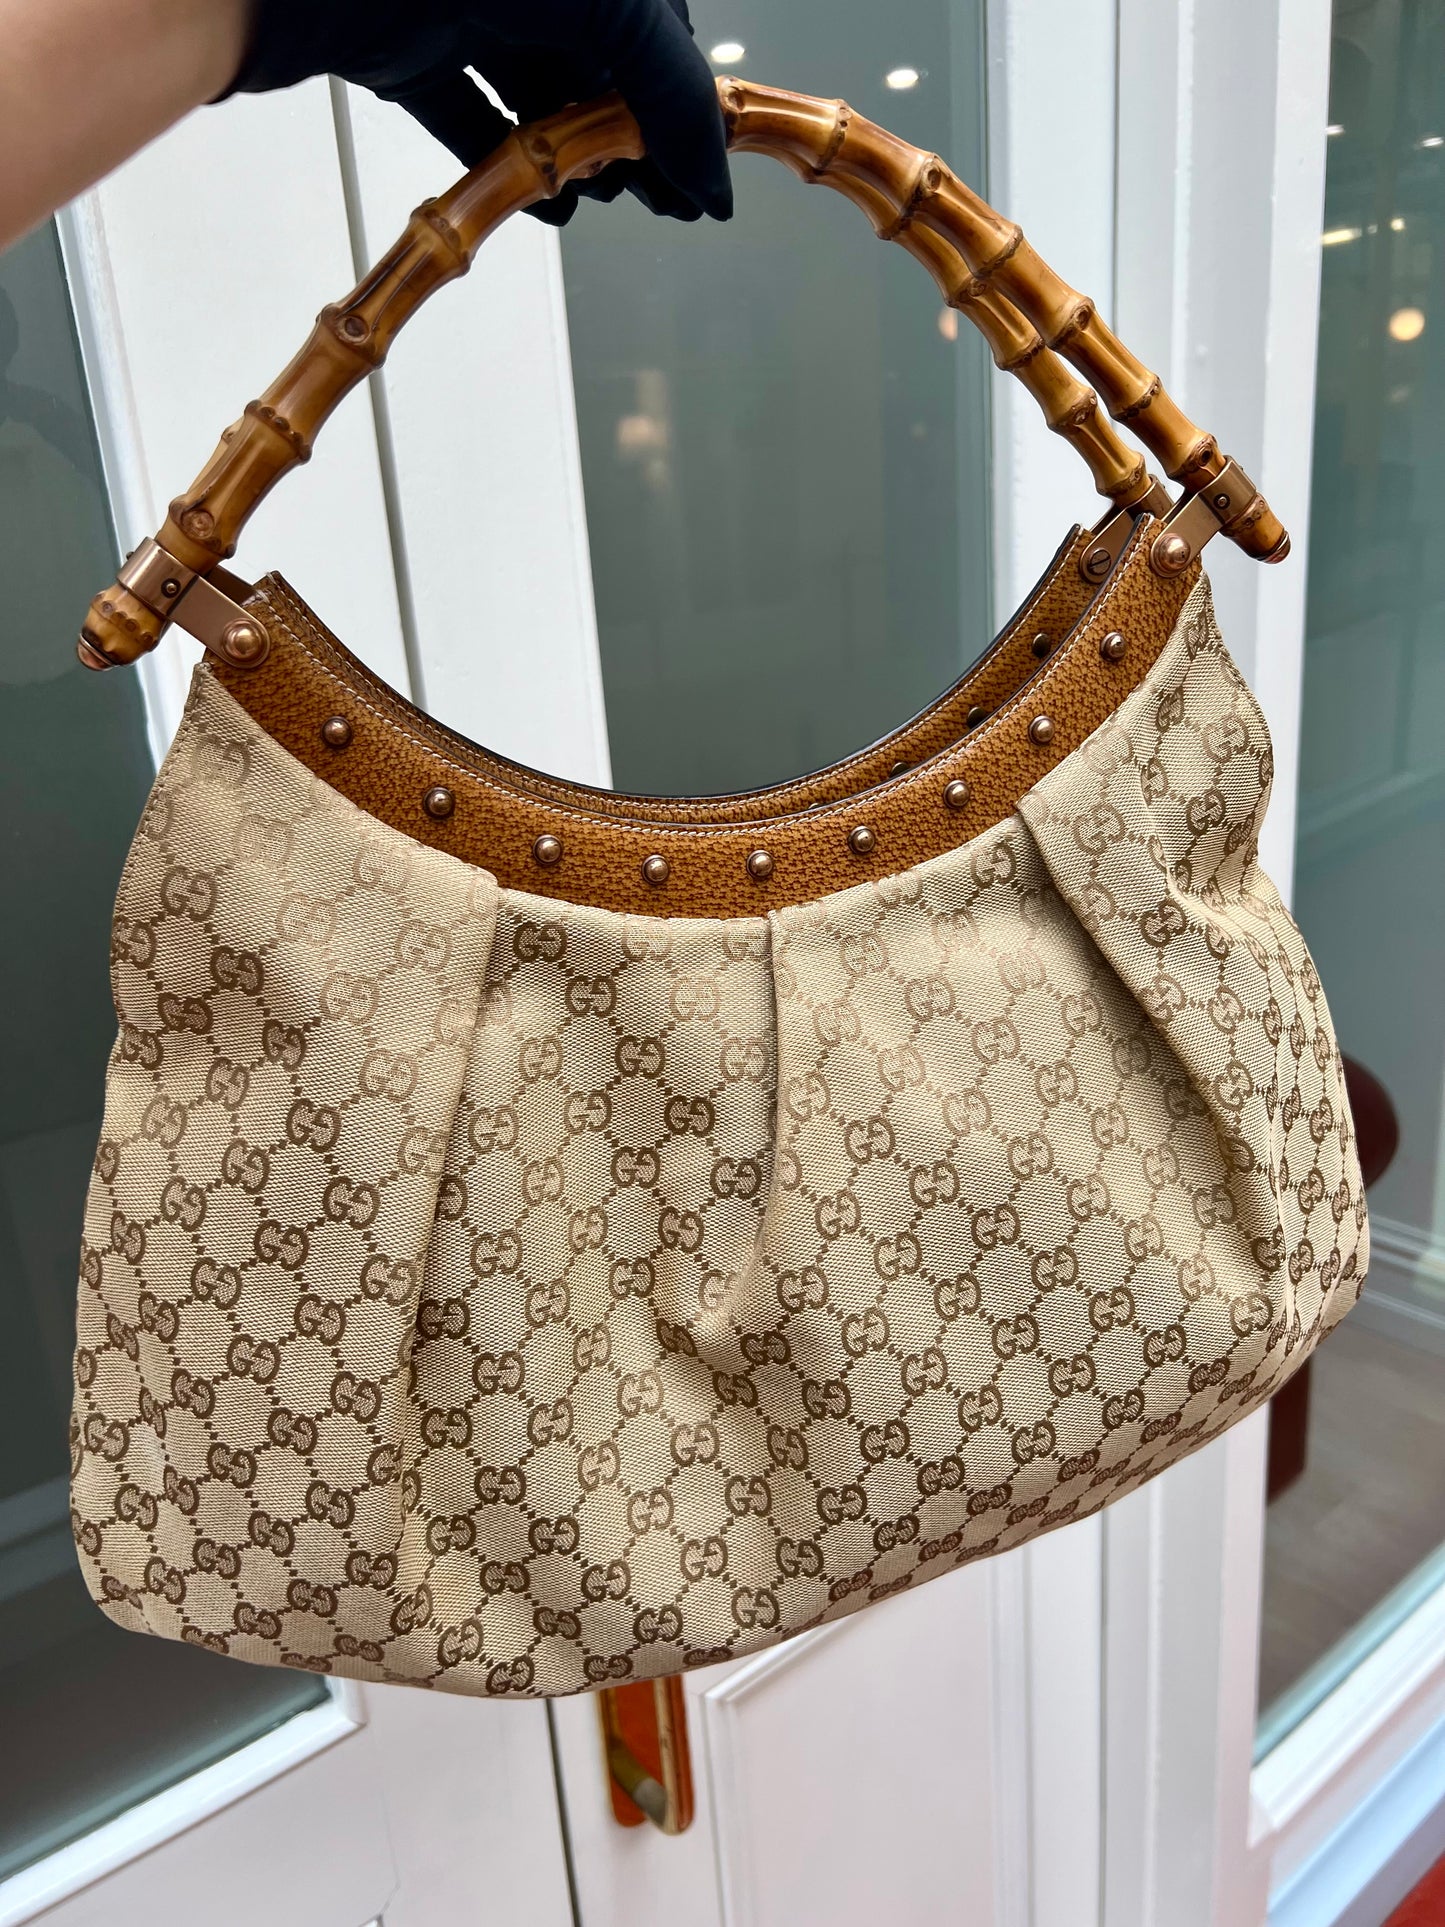 Pre-Owned
Gucci GG Canvas Bamboo Studded handbag 2000s